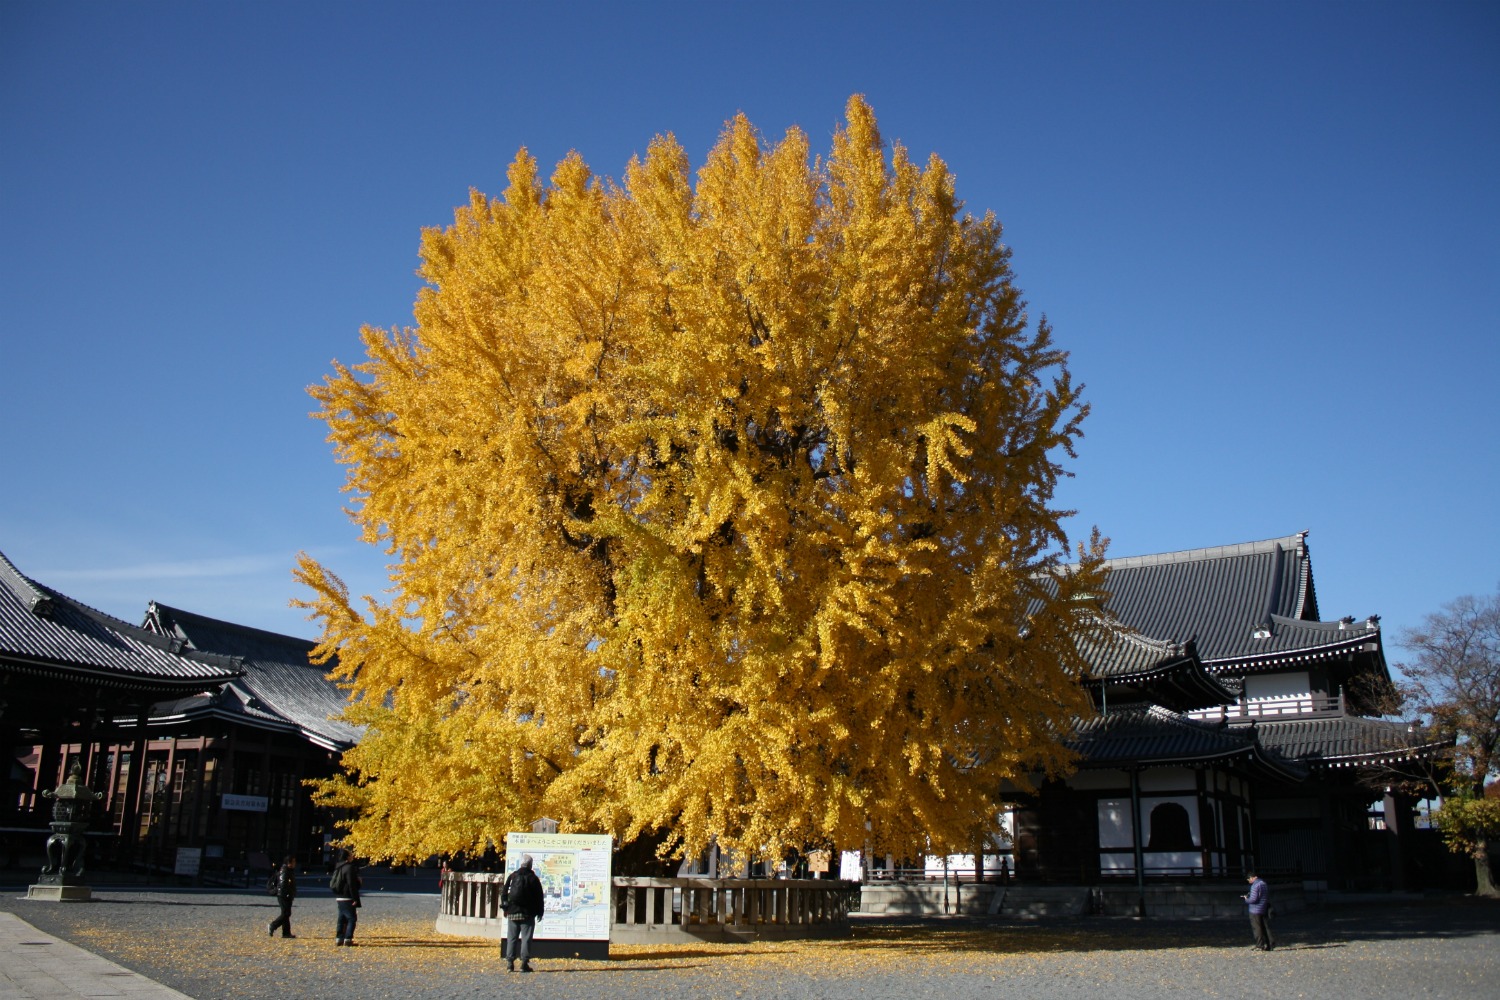 Autumn in Japan: gingkos, maples and hot tea